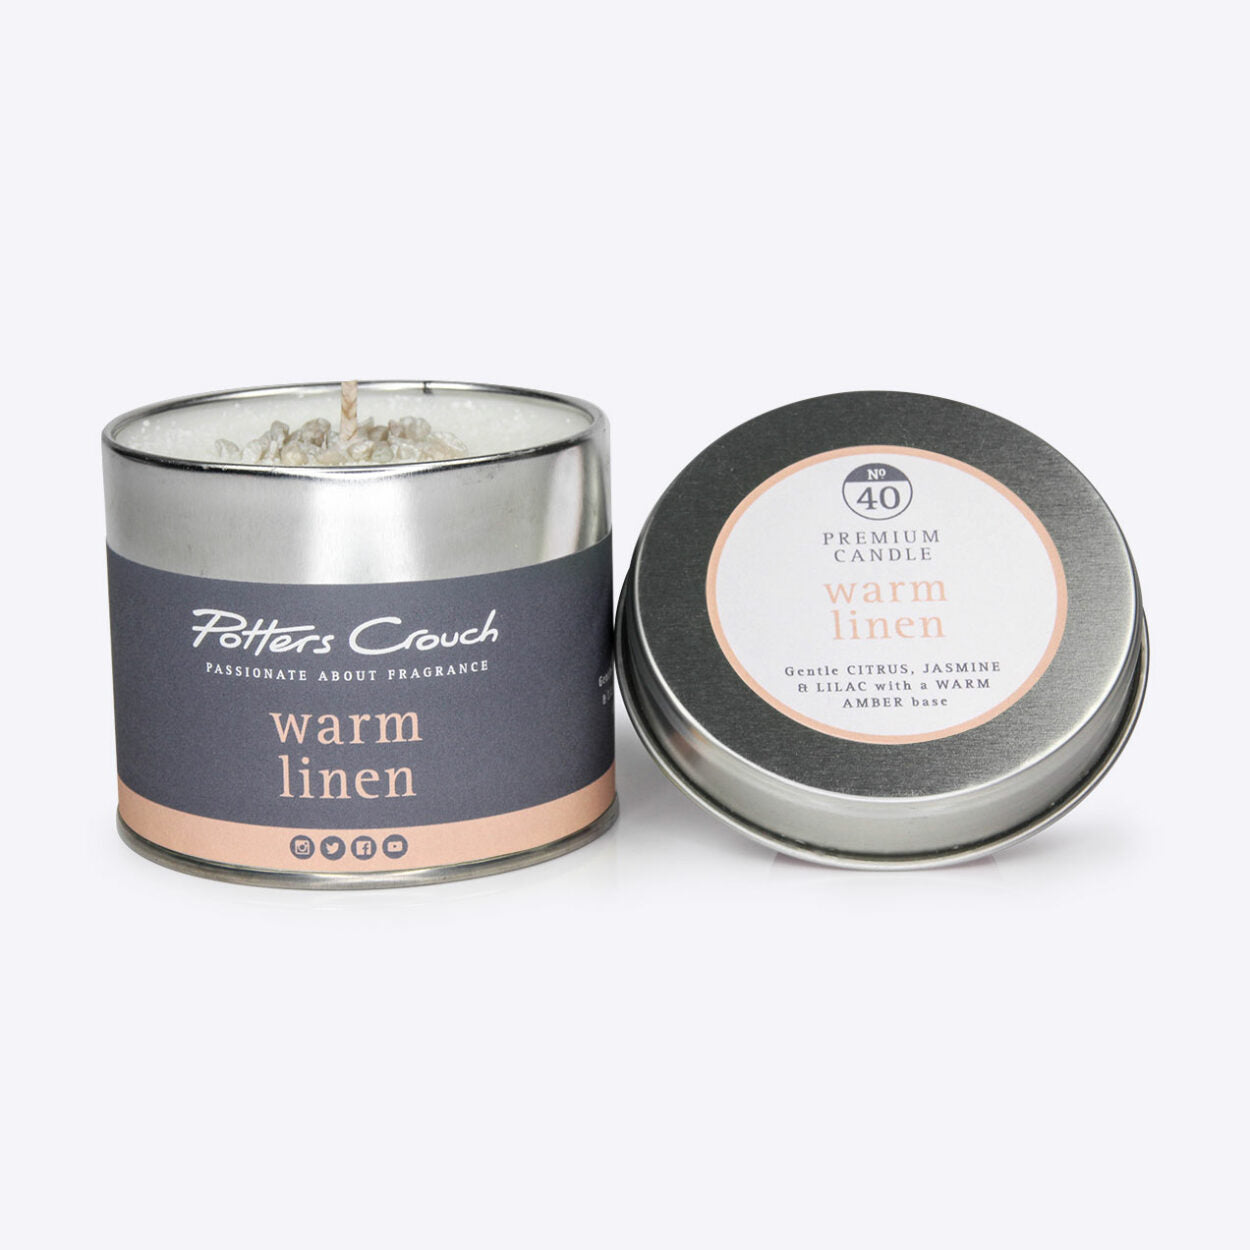 Potters Crouch Warm Linen Scented Candle in a Tin